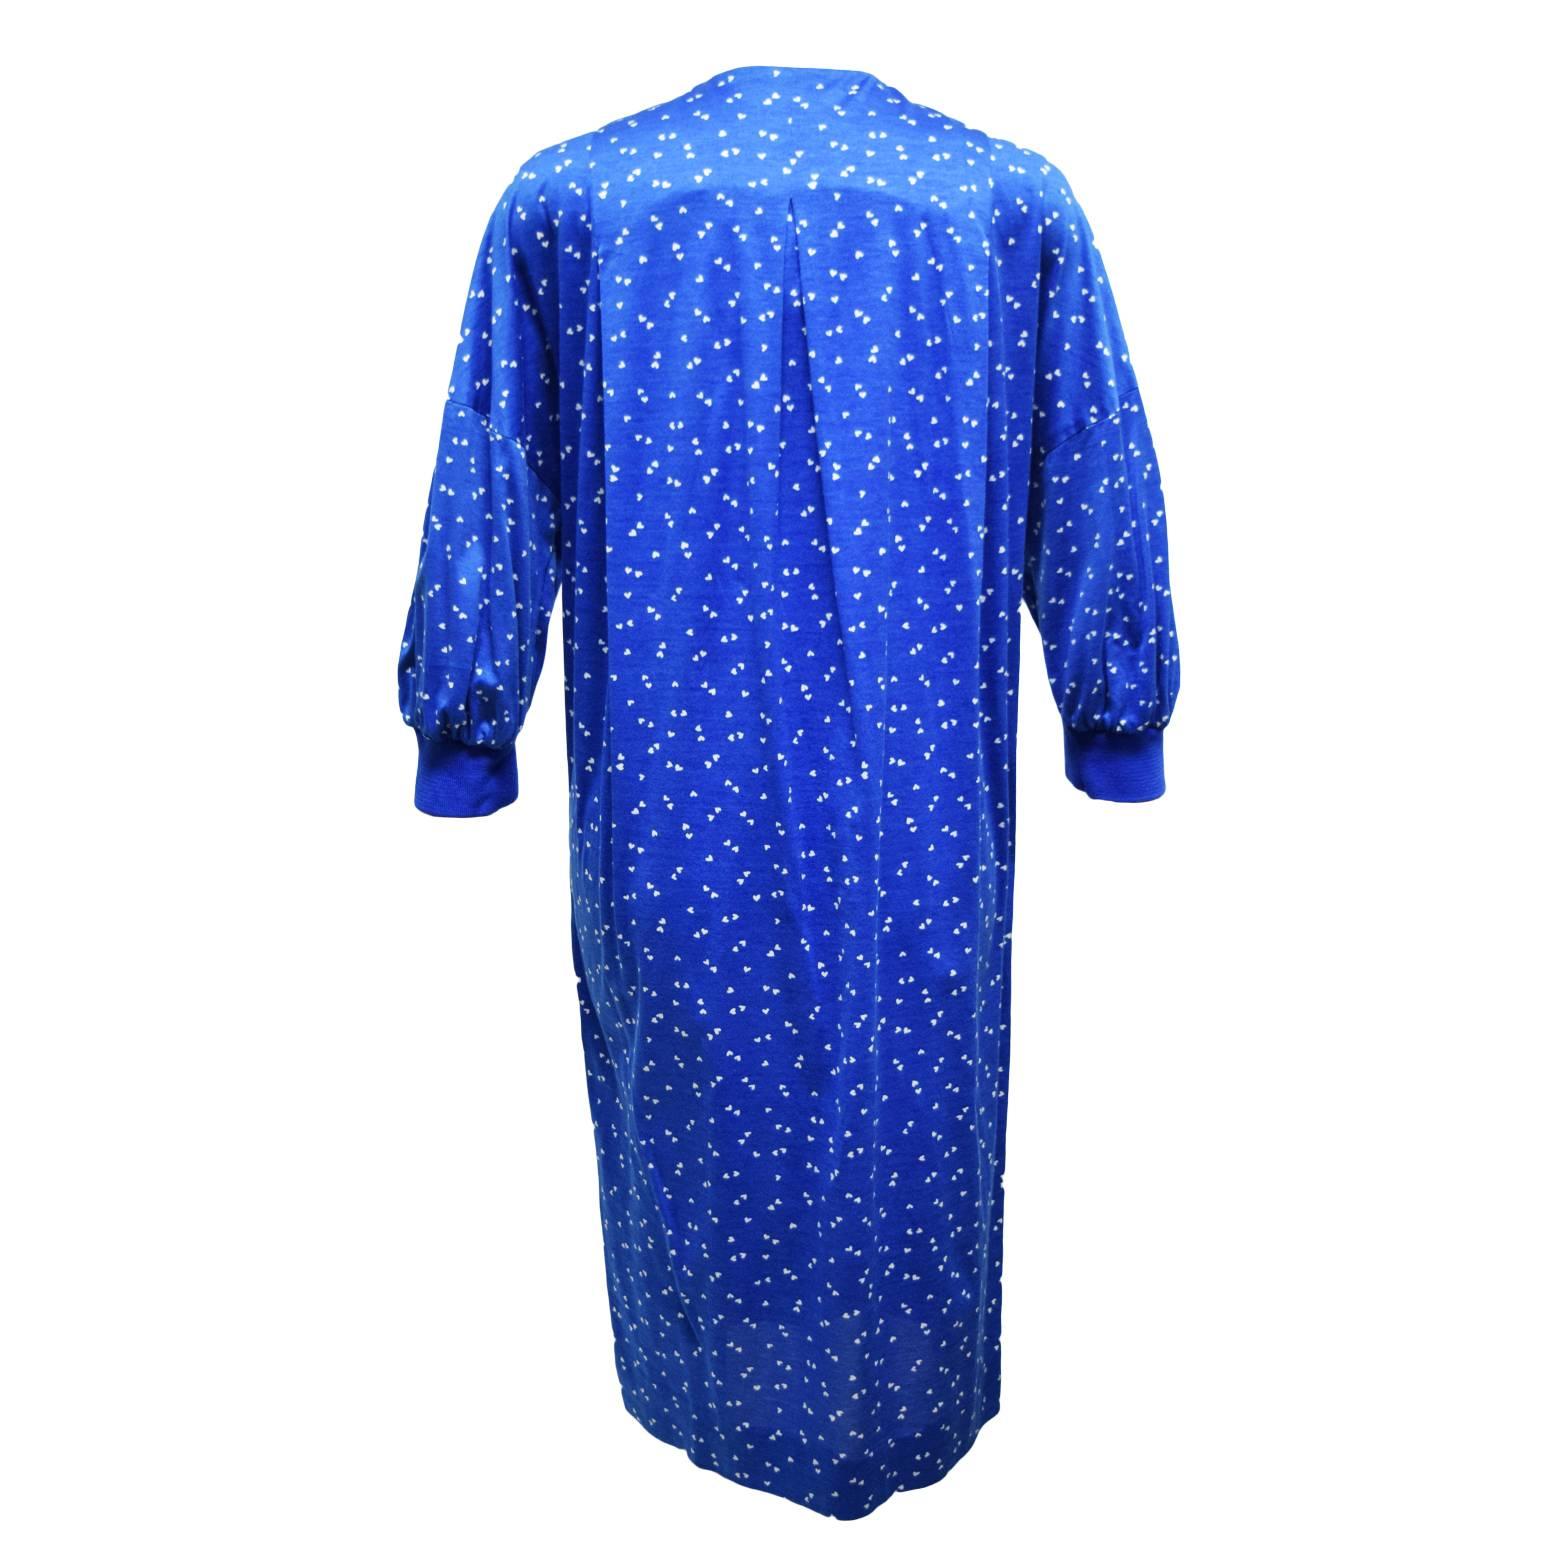 This Akris shirt dress is 100% blue and white heart printed cotton, and has iridescent pearl like heart shaped button front embellishments. The sleeves are shirt bat winged sleeves and the dress has pleating detailing for shape.   